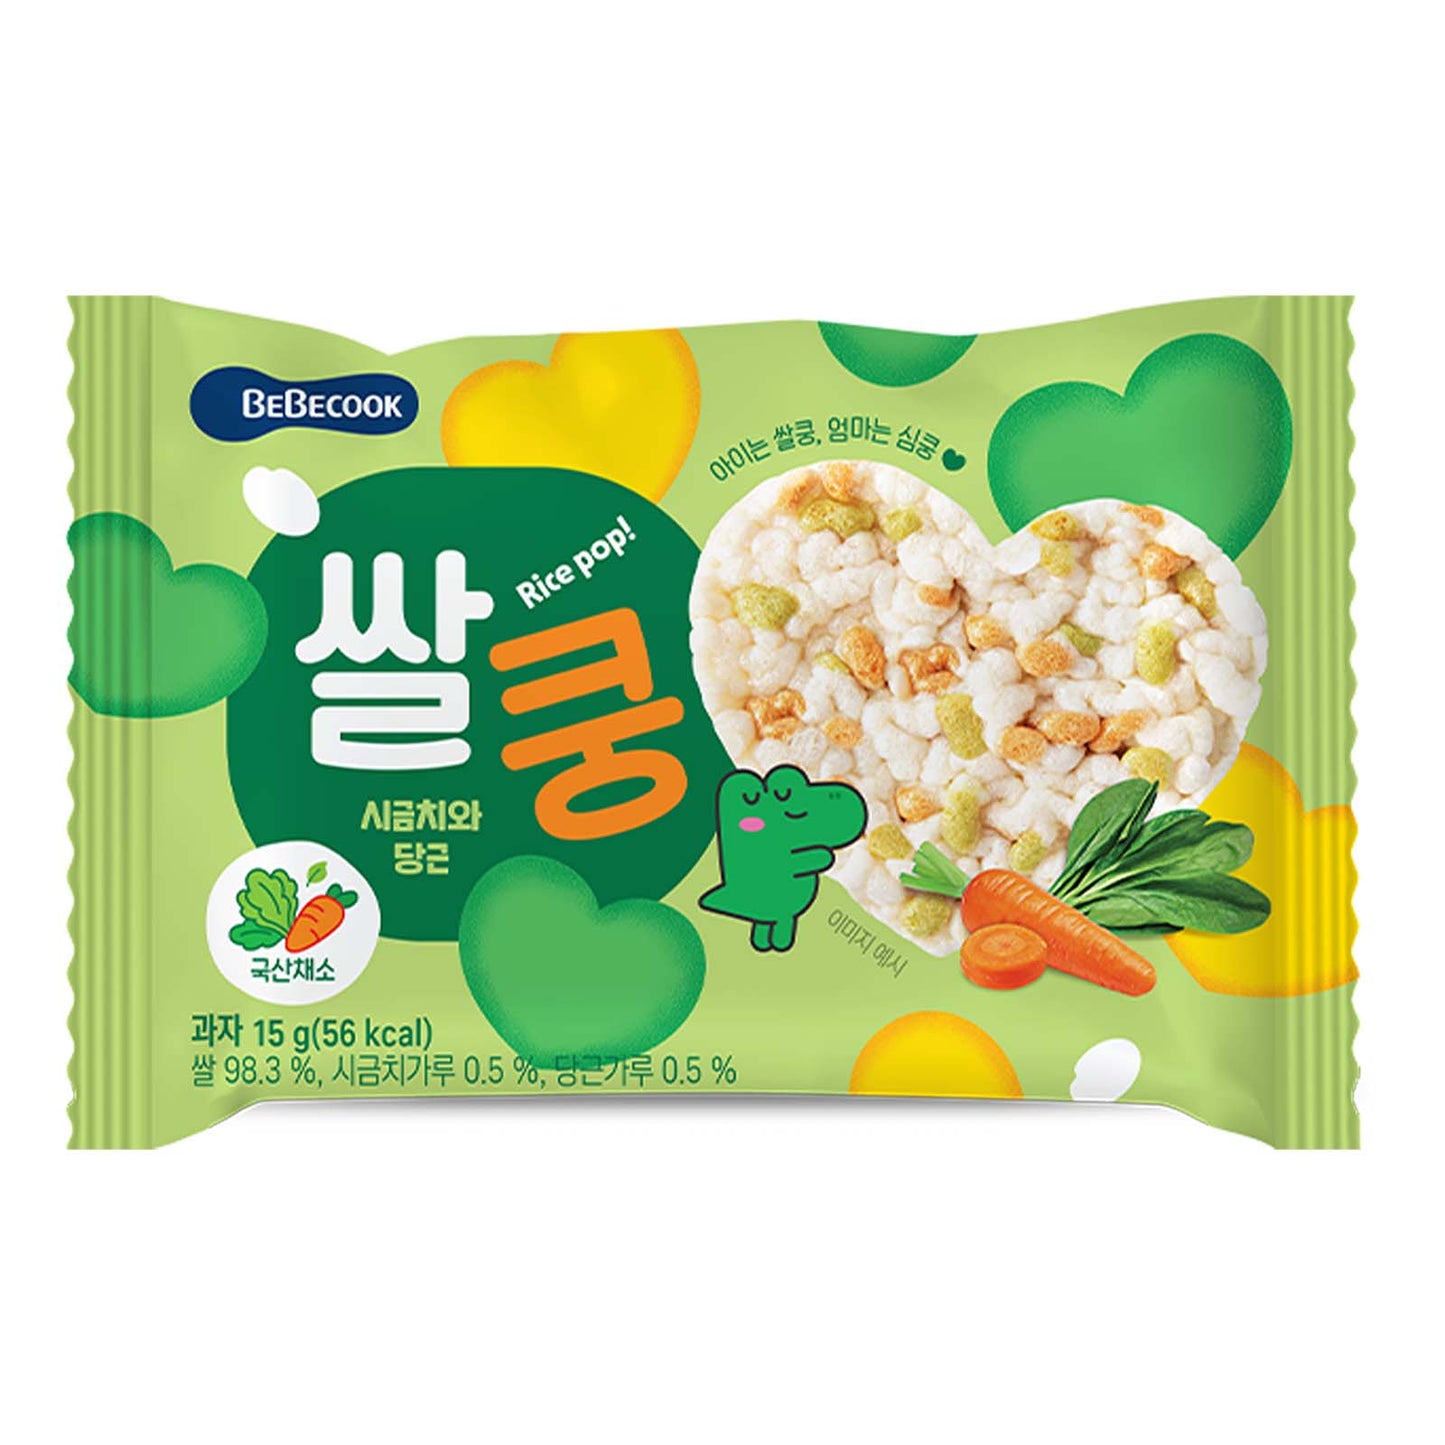 BeBecook - King Rice Puff (Spinach & Carrot) 15g